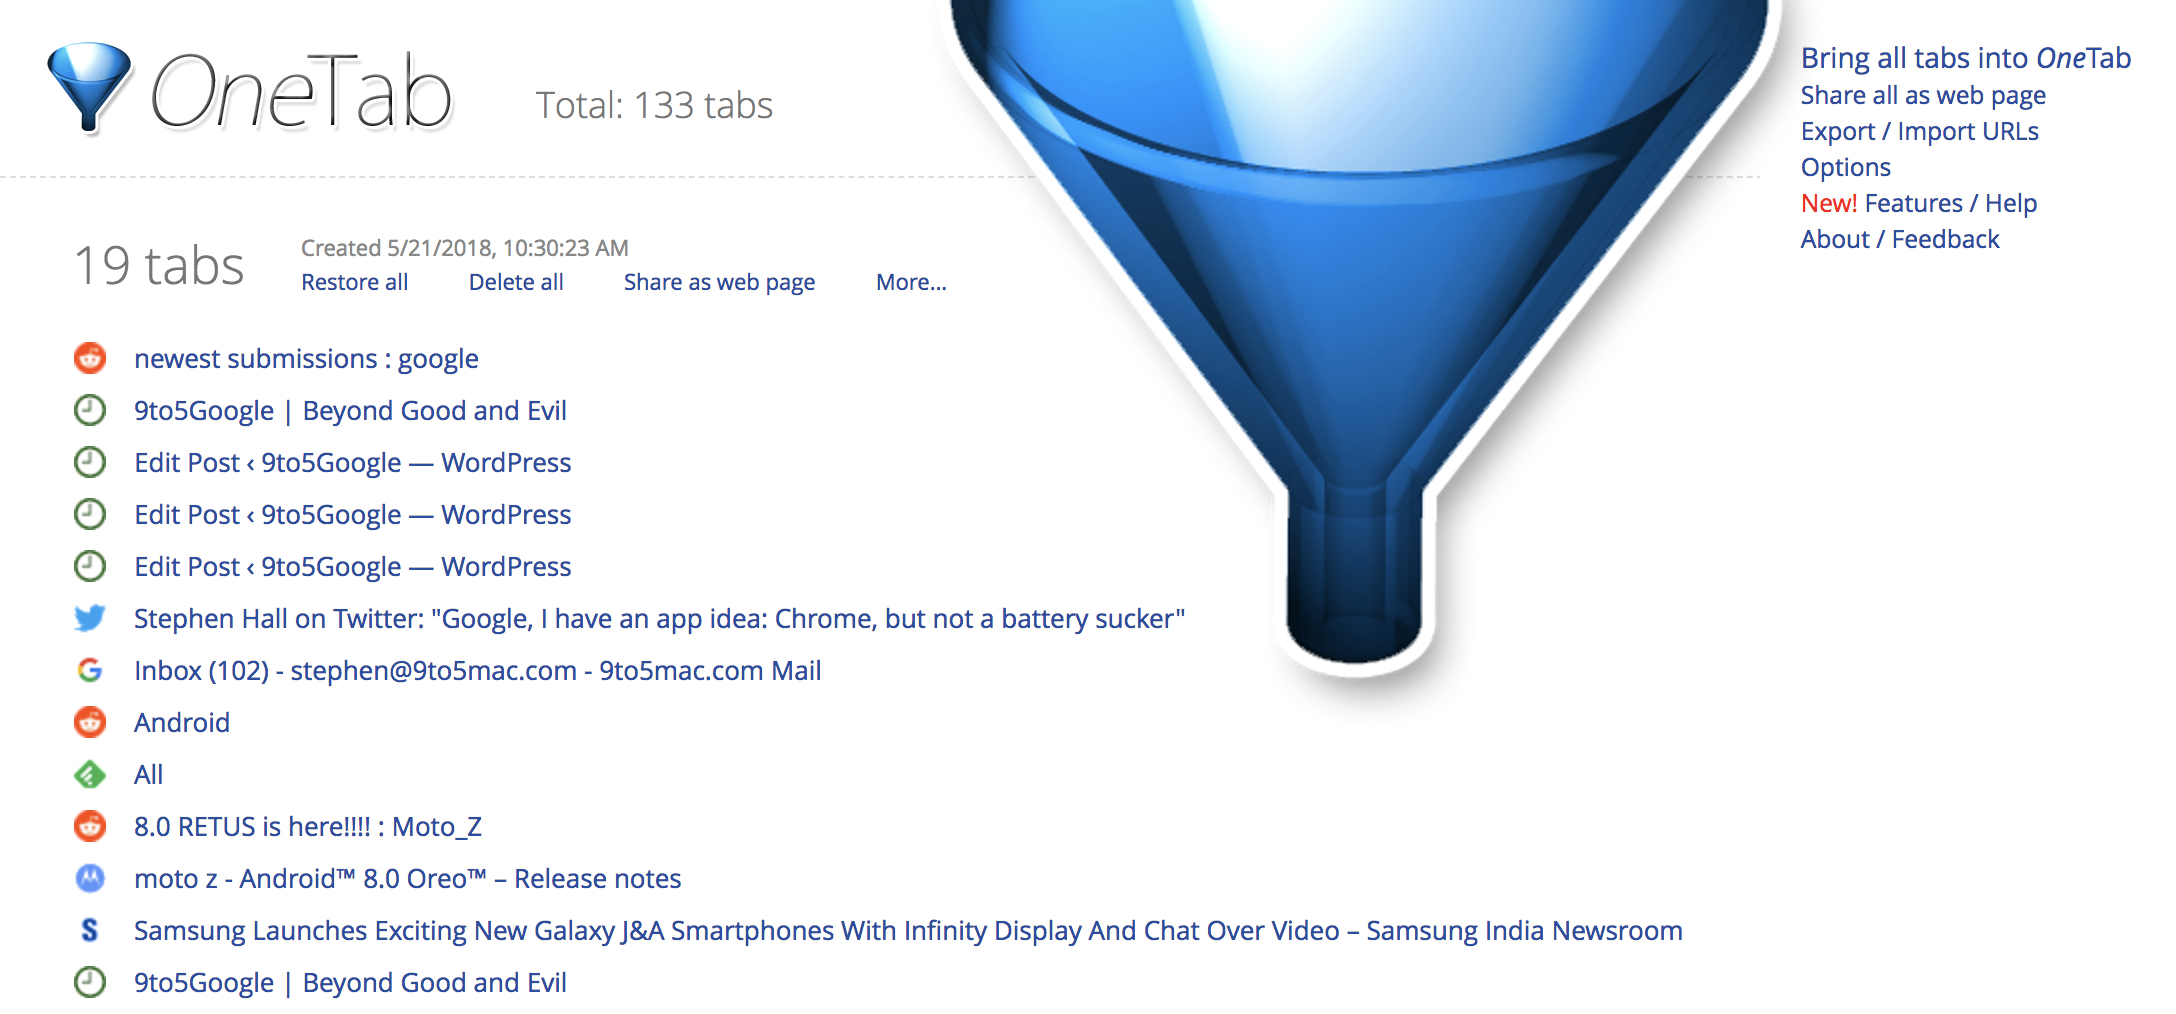 Review: 'OneTab' is the perfect extension for managing your Chrome tab chaos